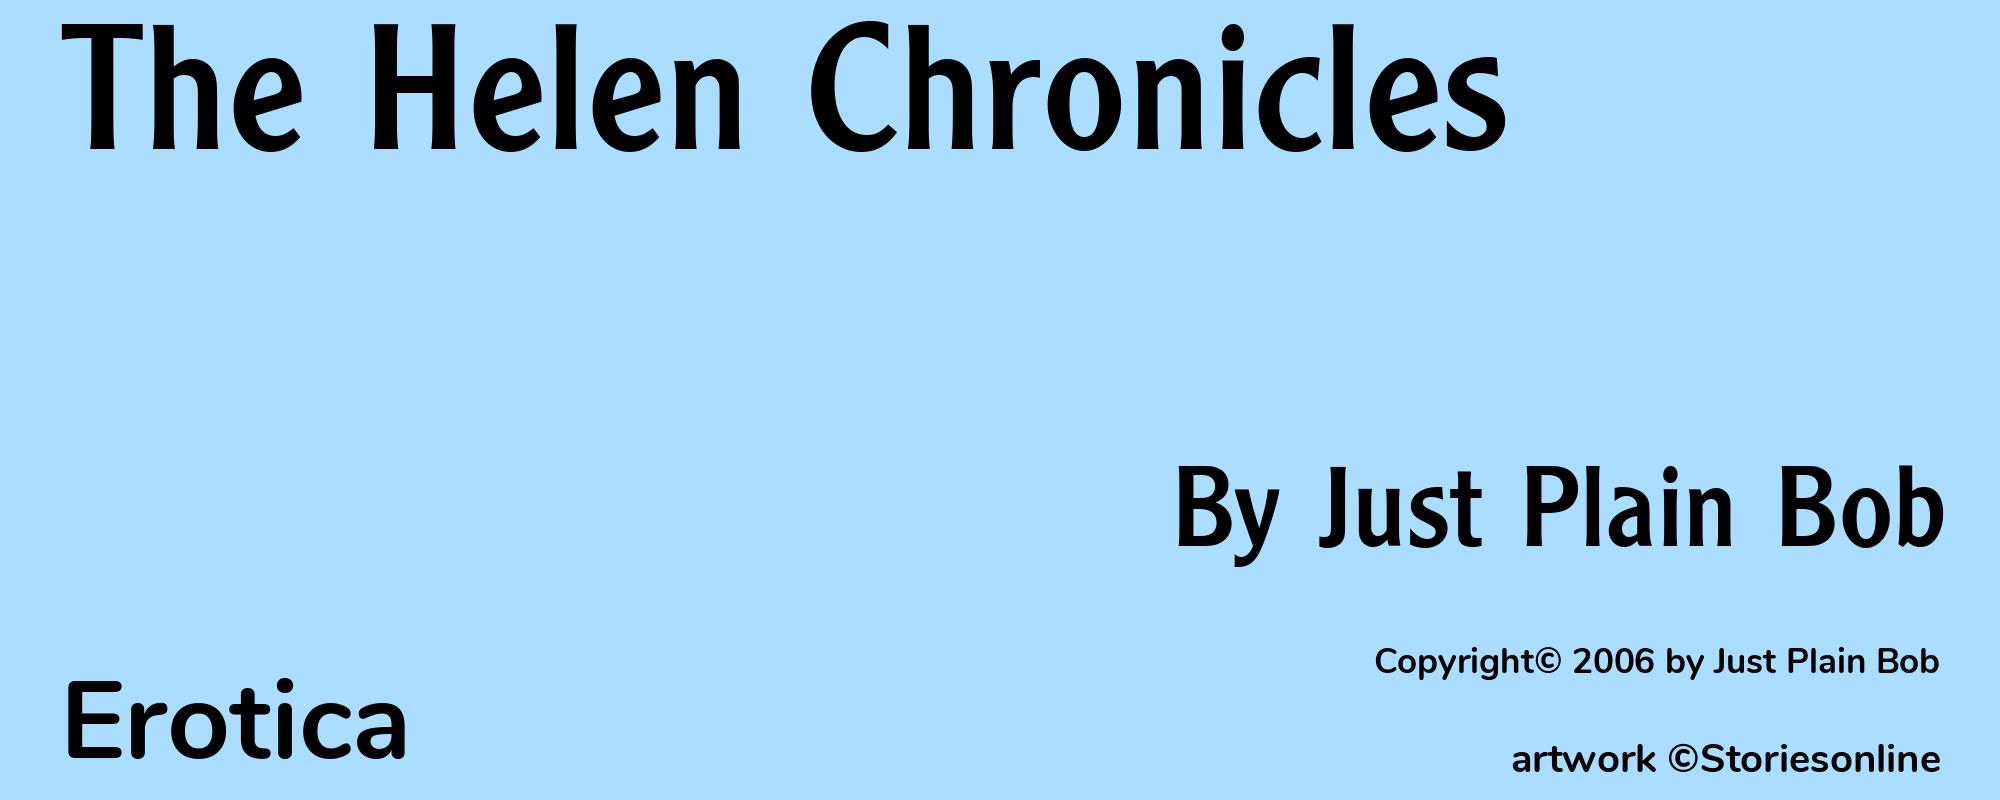 The Helen Chronicles - Cover